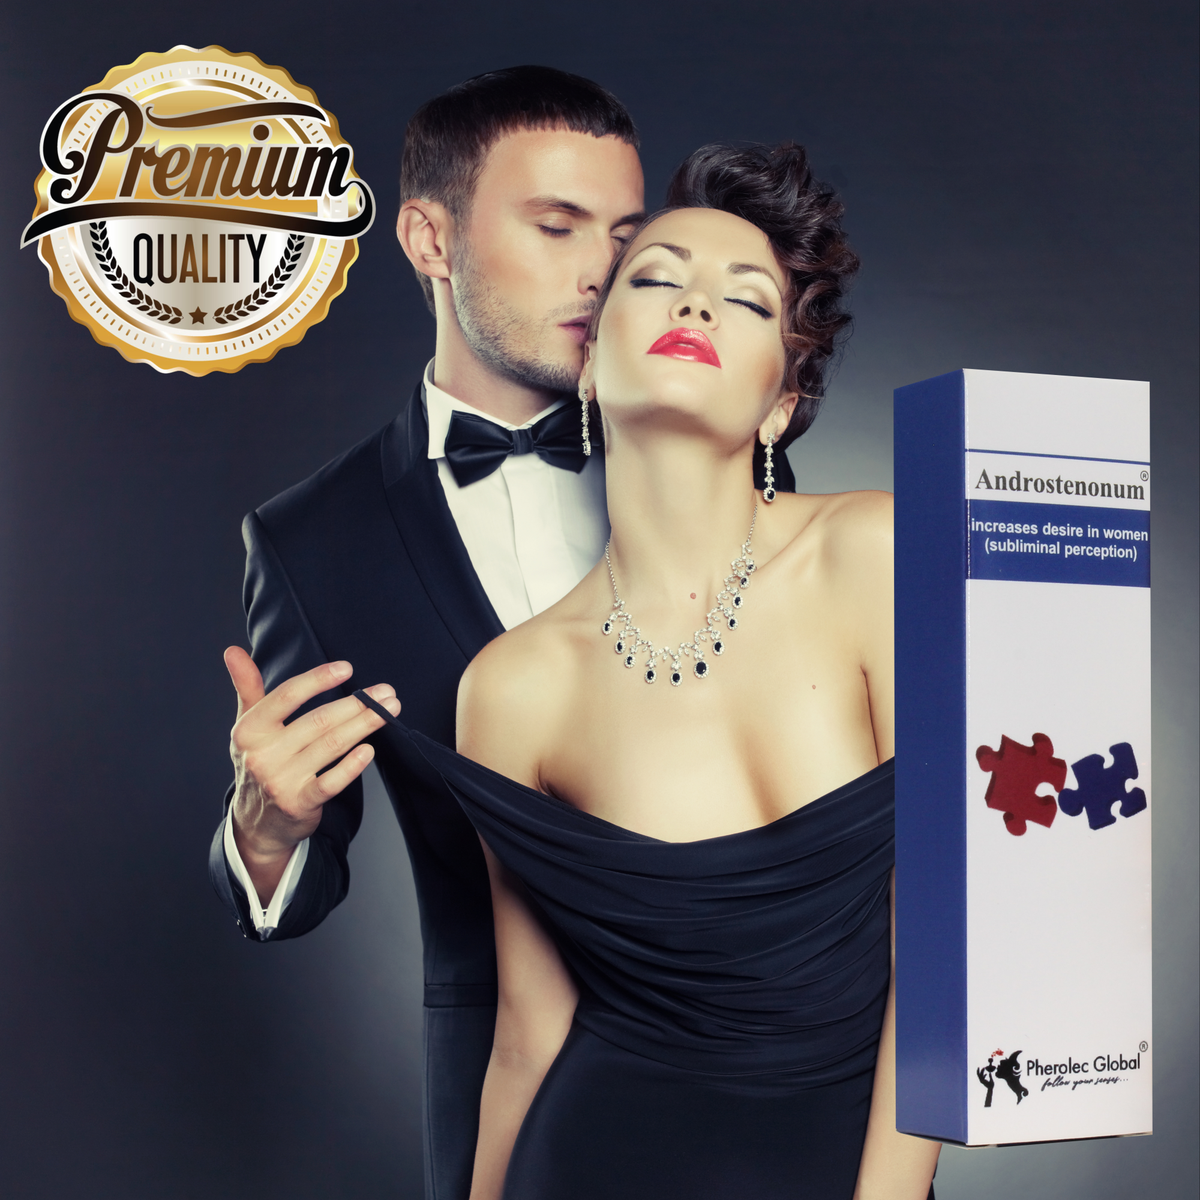 men uses androstenonum and attracts women, strong pheromone